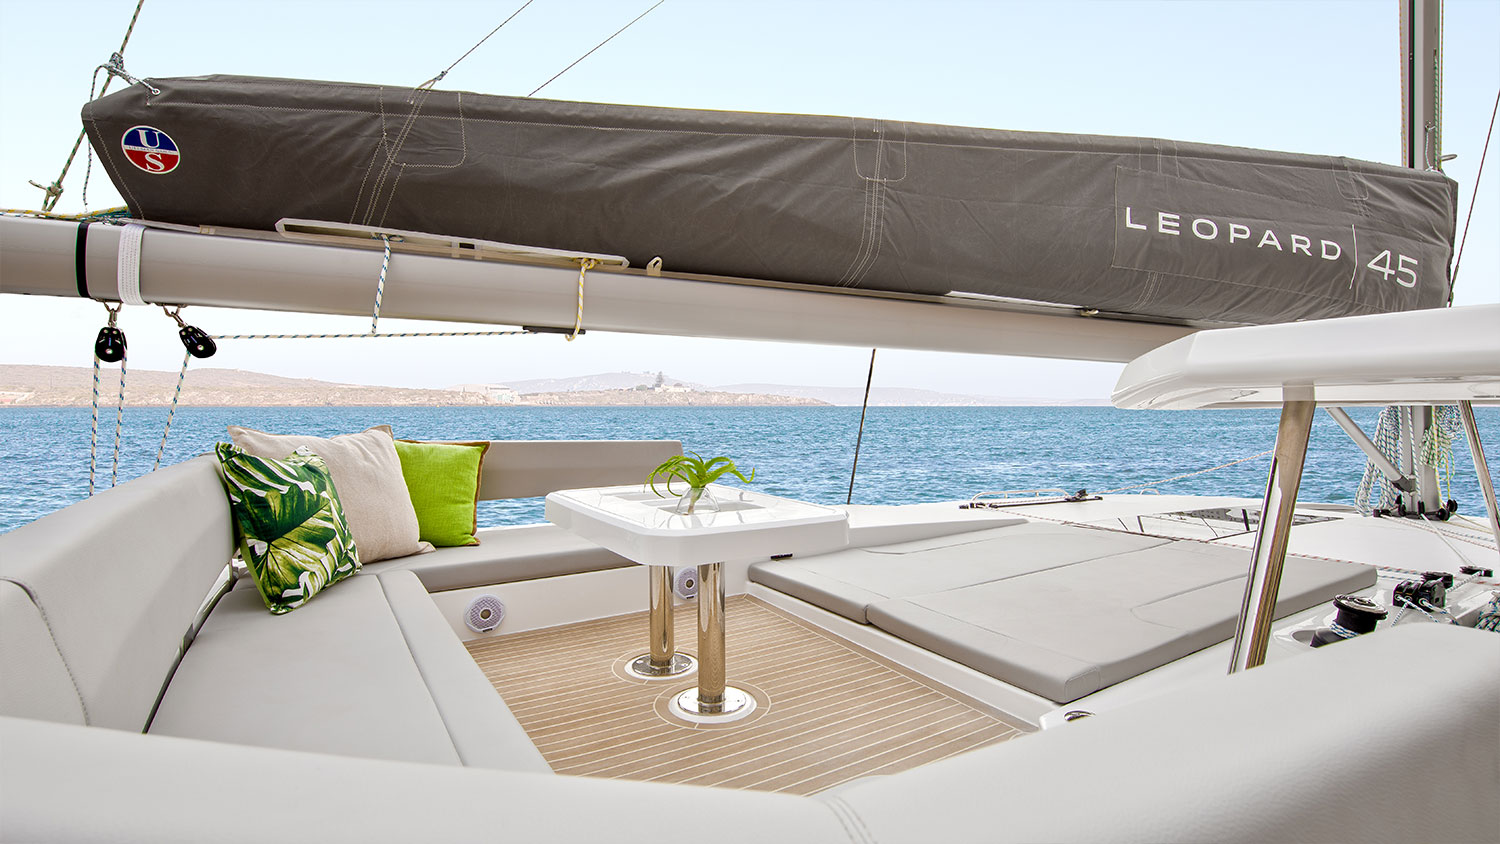 "Luxury Leopard 45 Yacht Charter - Unforgettable Sailing Experience"